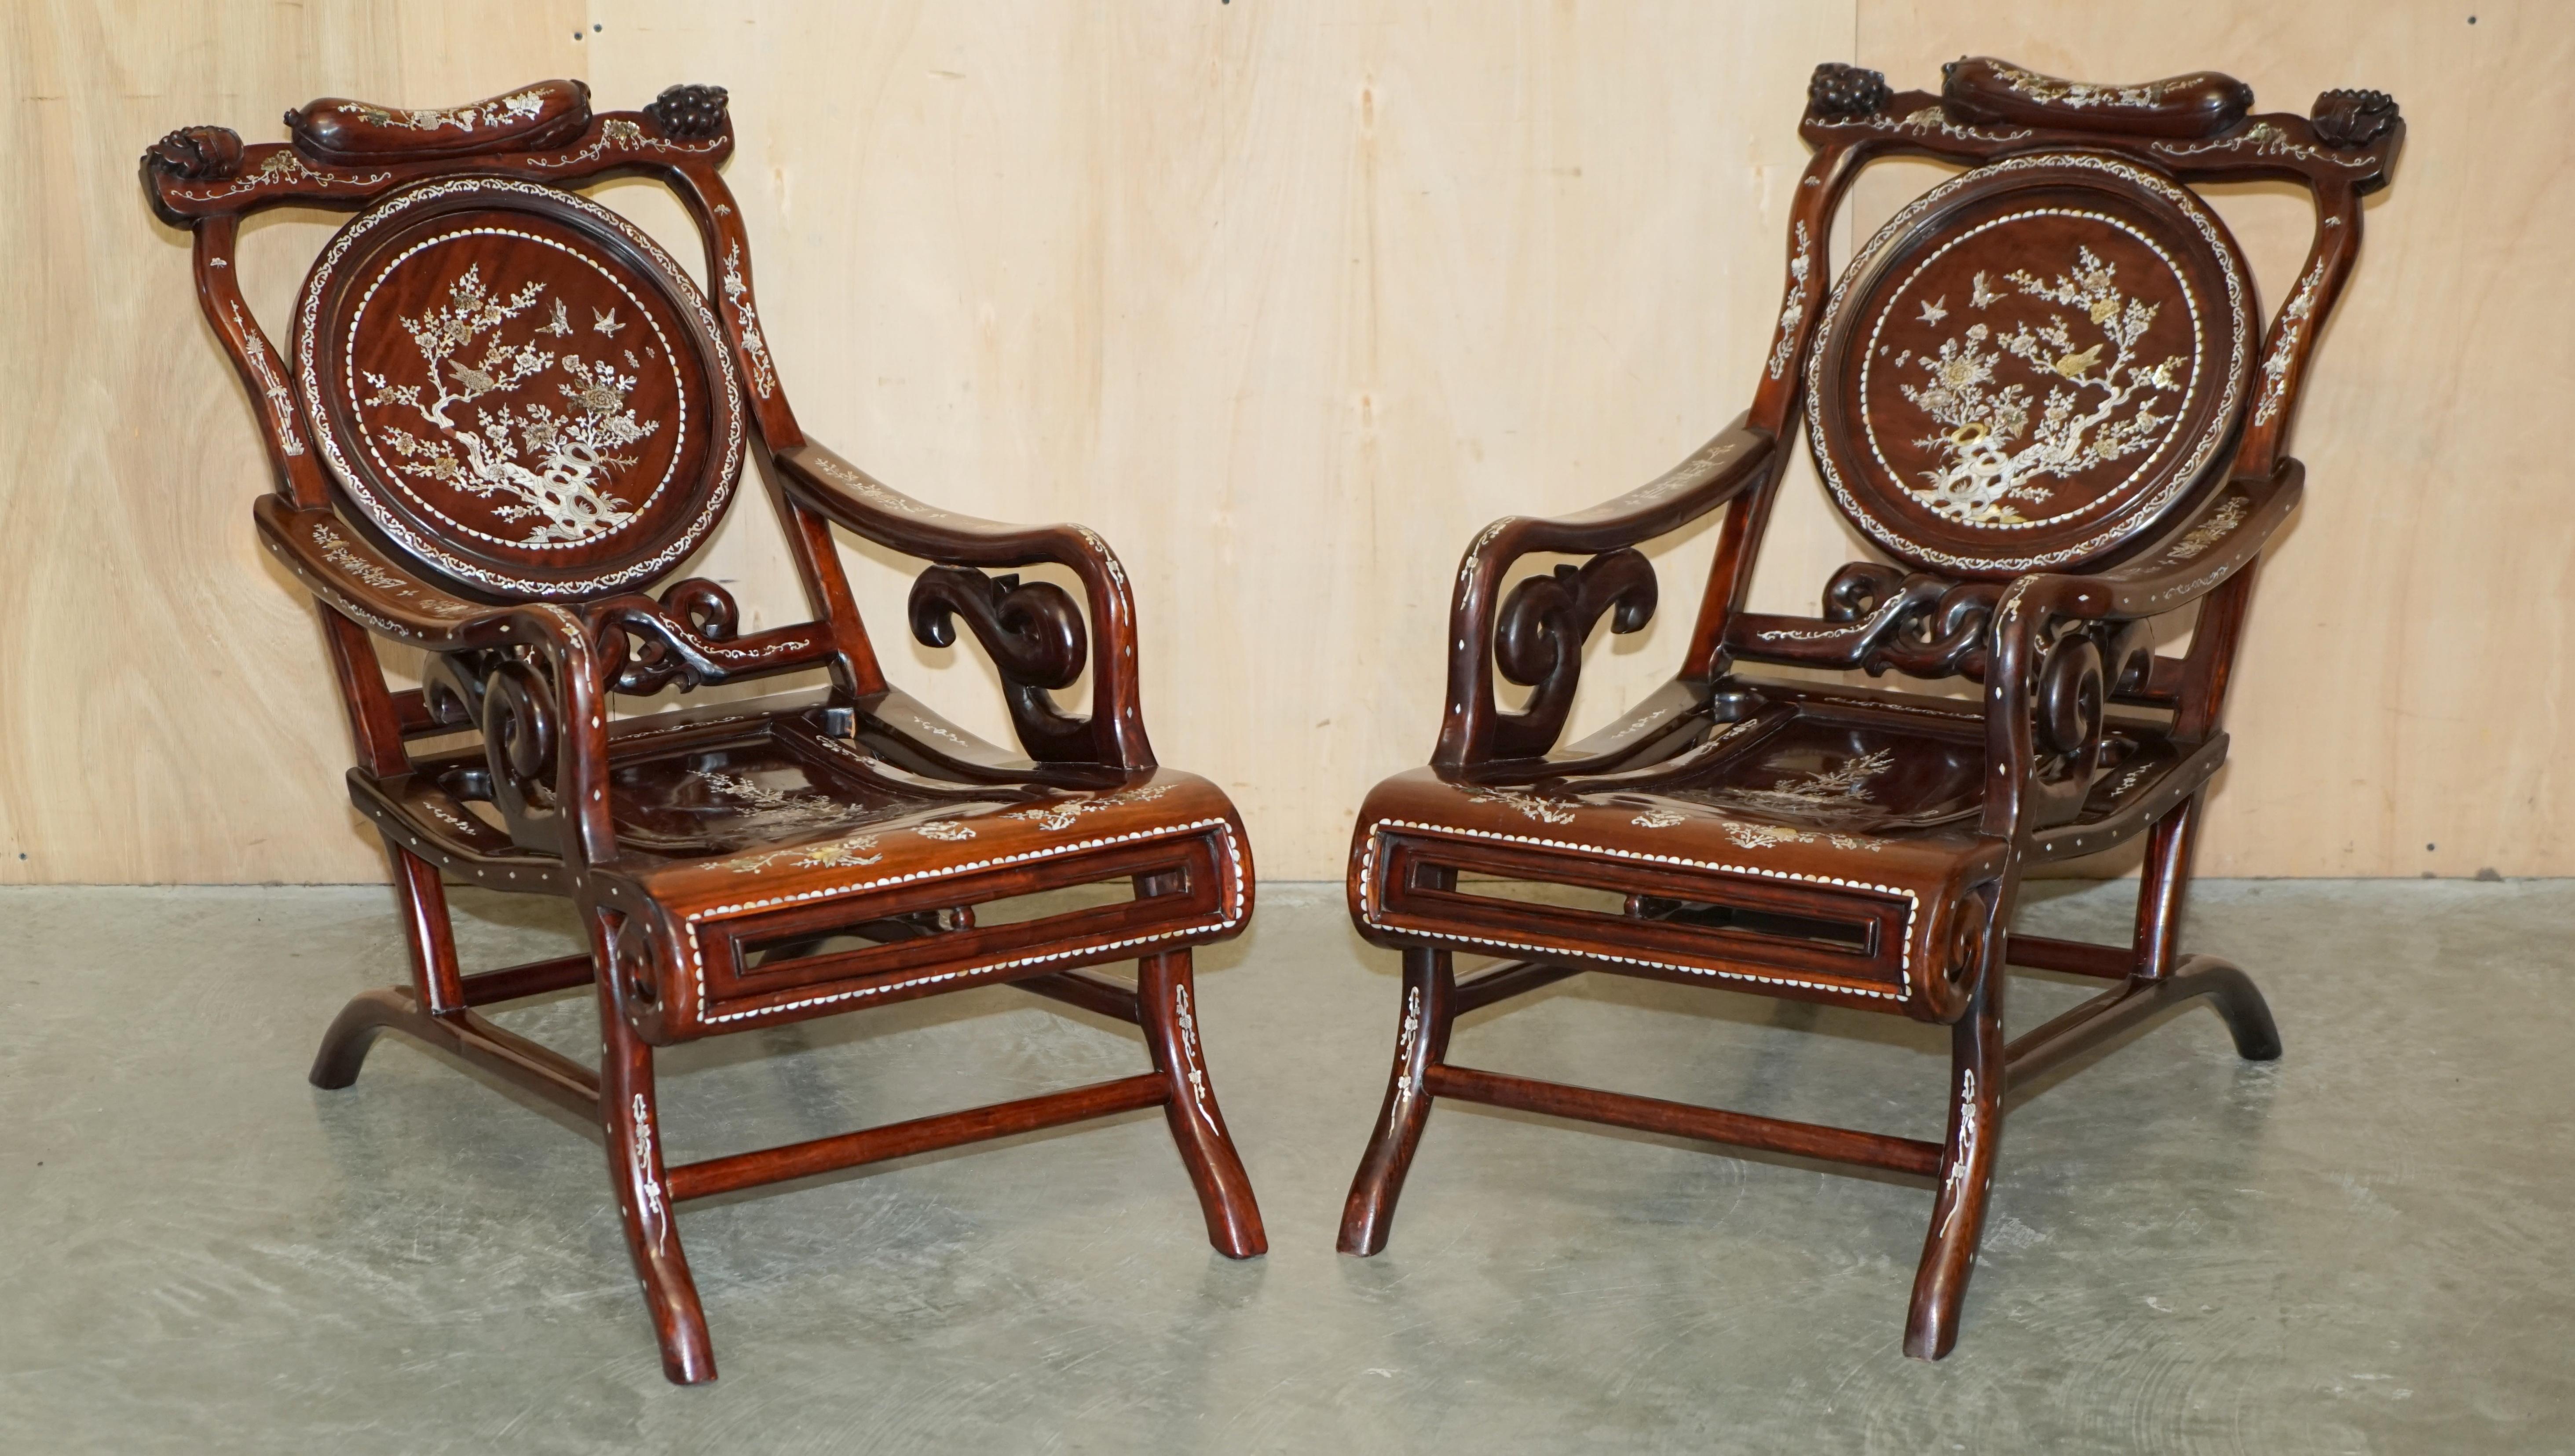 We are delighted to offer for sale this stunning pair of antique Chinese Padauk wood with ornate Mother of Pearl inlay reclined plantation style armchairs with matching side table

A very good looking and decorative pair of antique Chinese